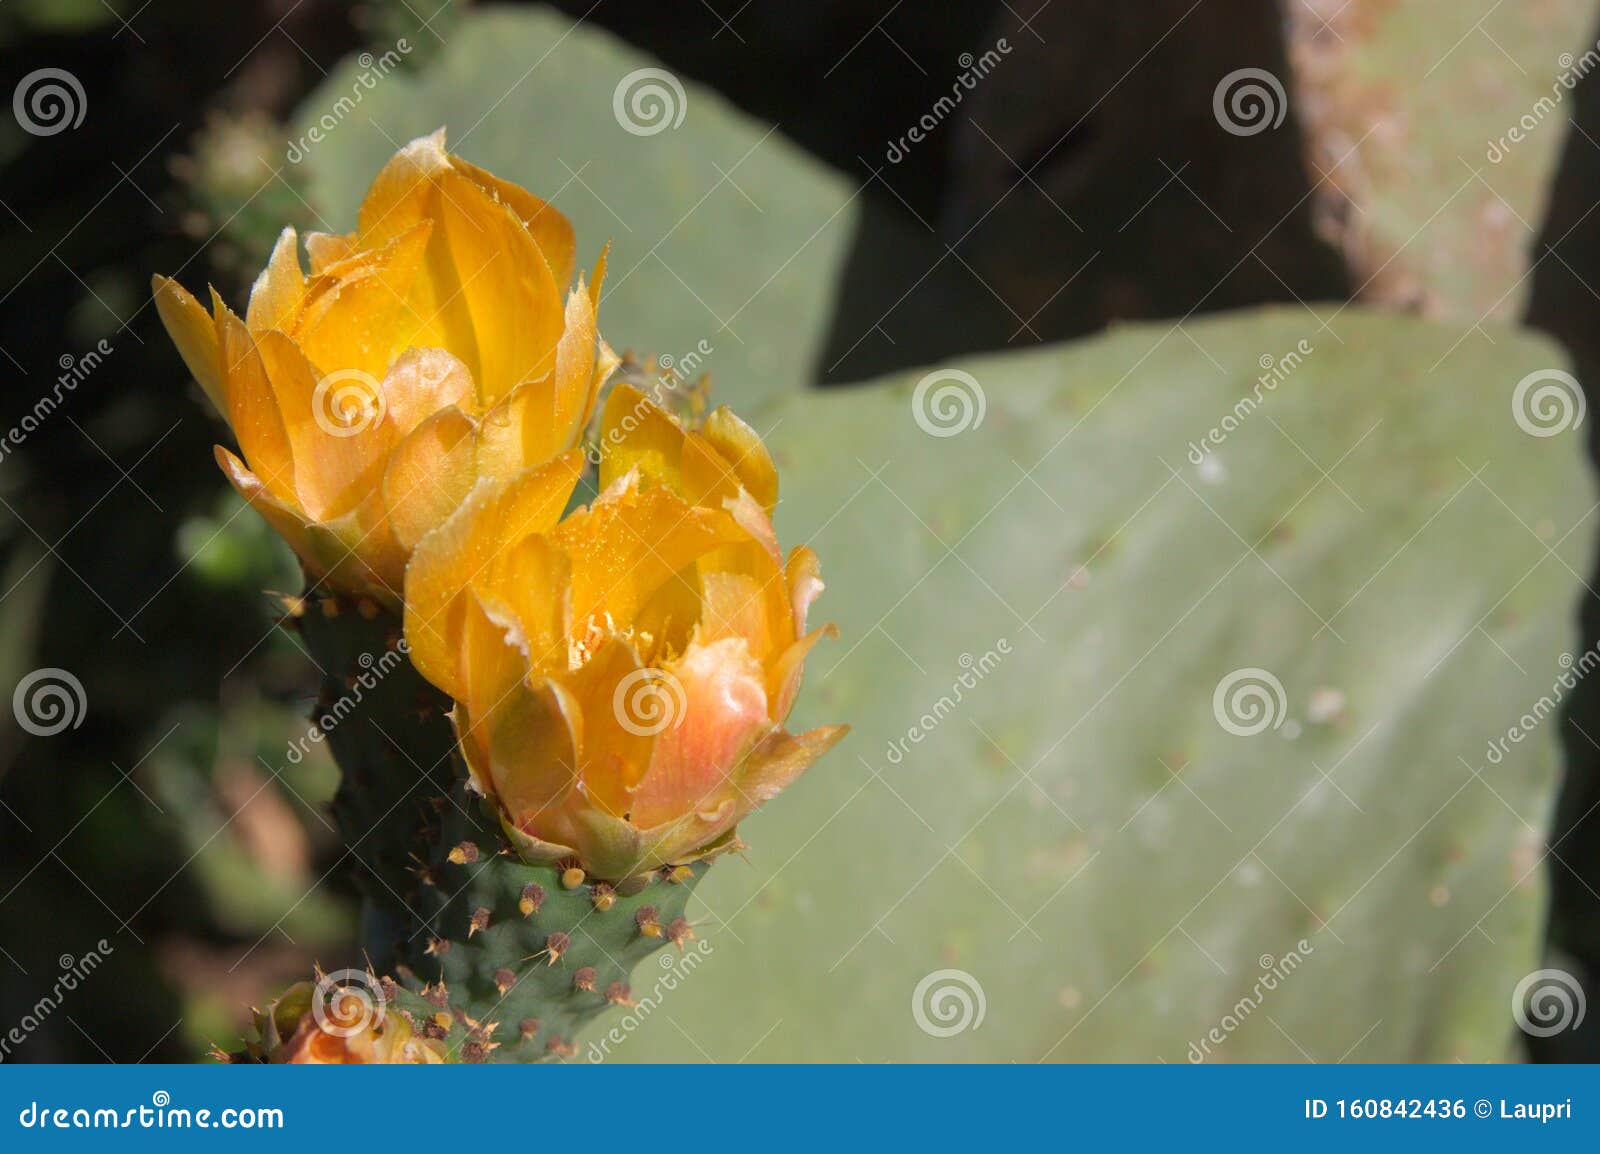 opuntia, prickly pear or cactus flower from which the prickly pear is obtained as fruit